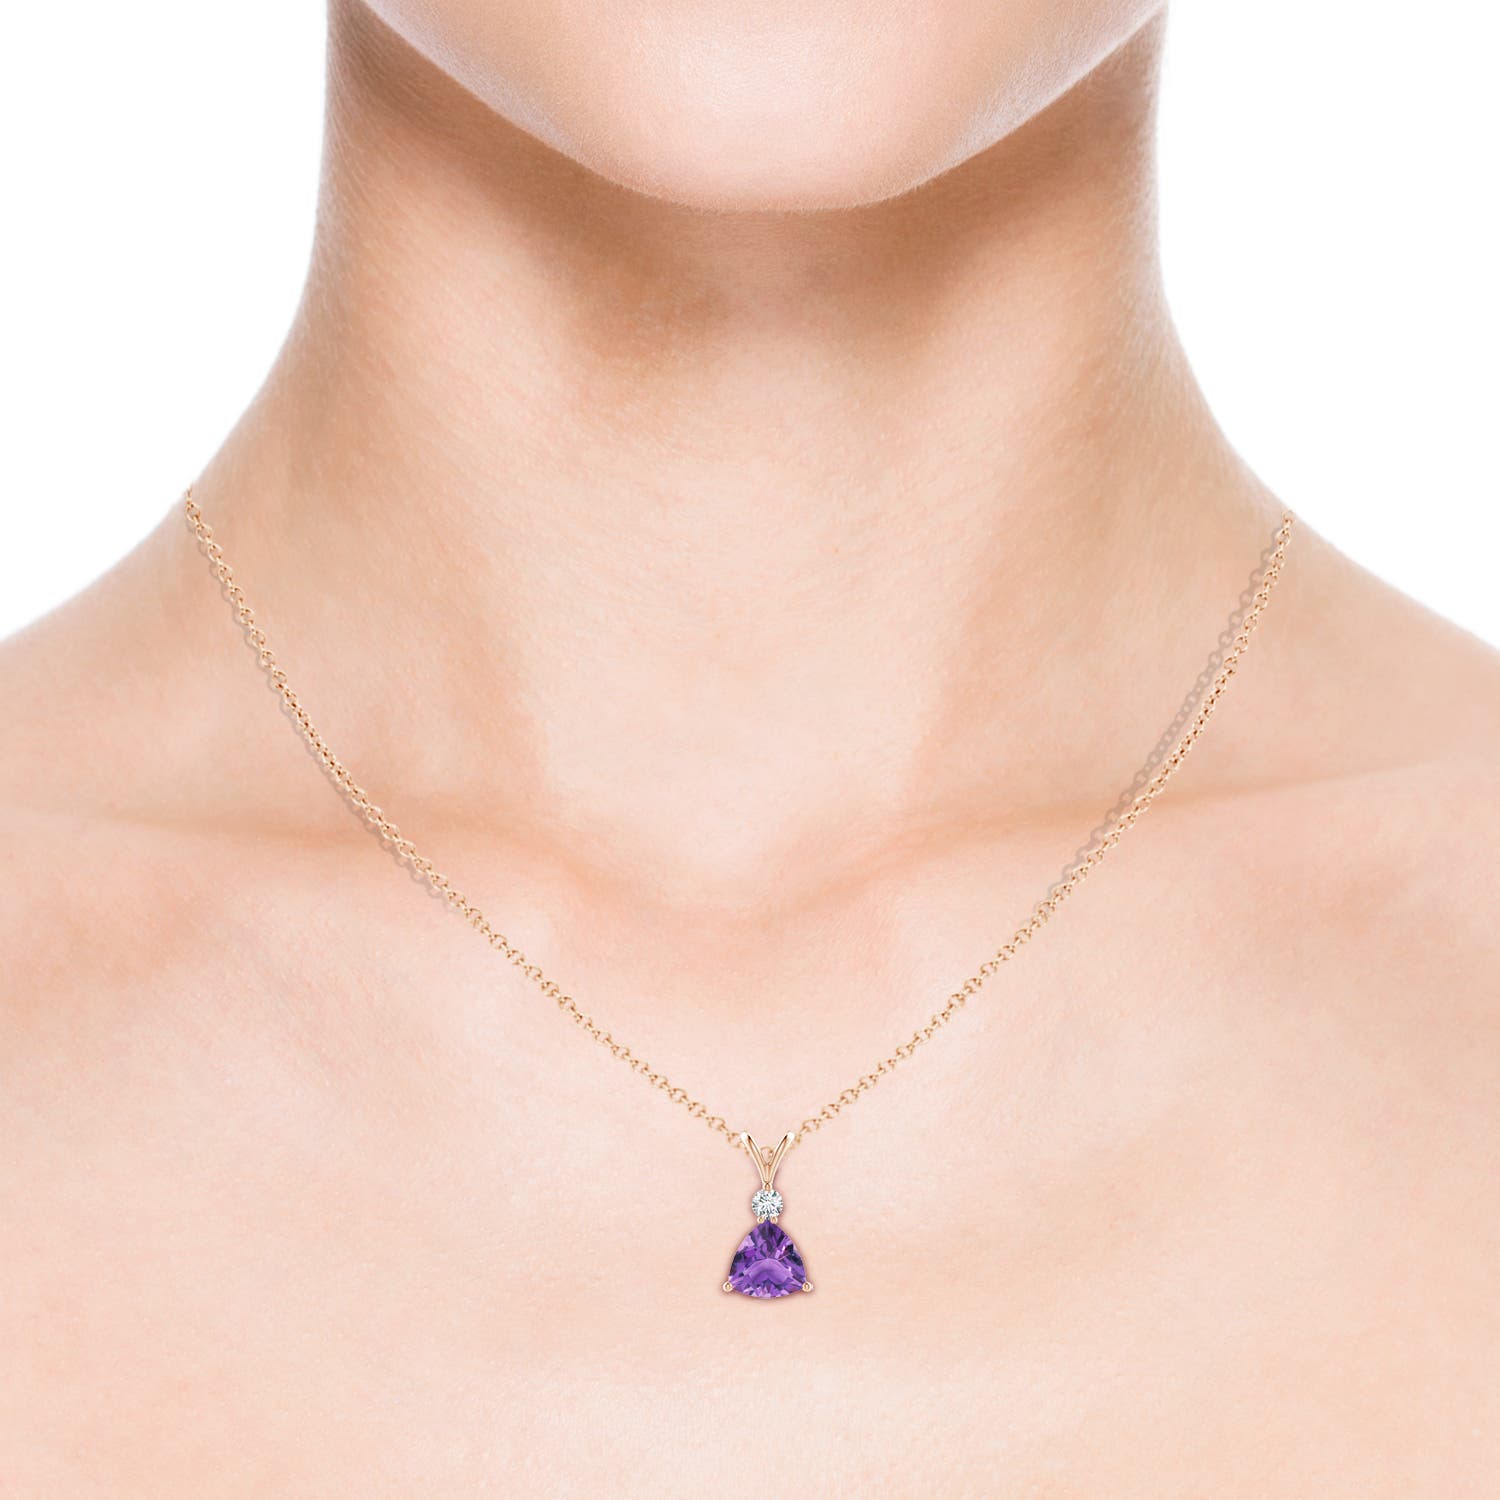 AA - Amethyst / 1.21 CT / 14 KT Rose Gold